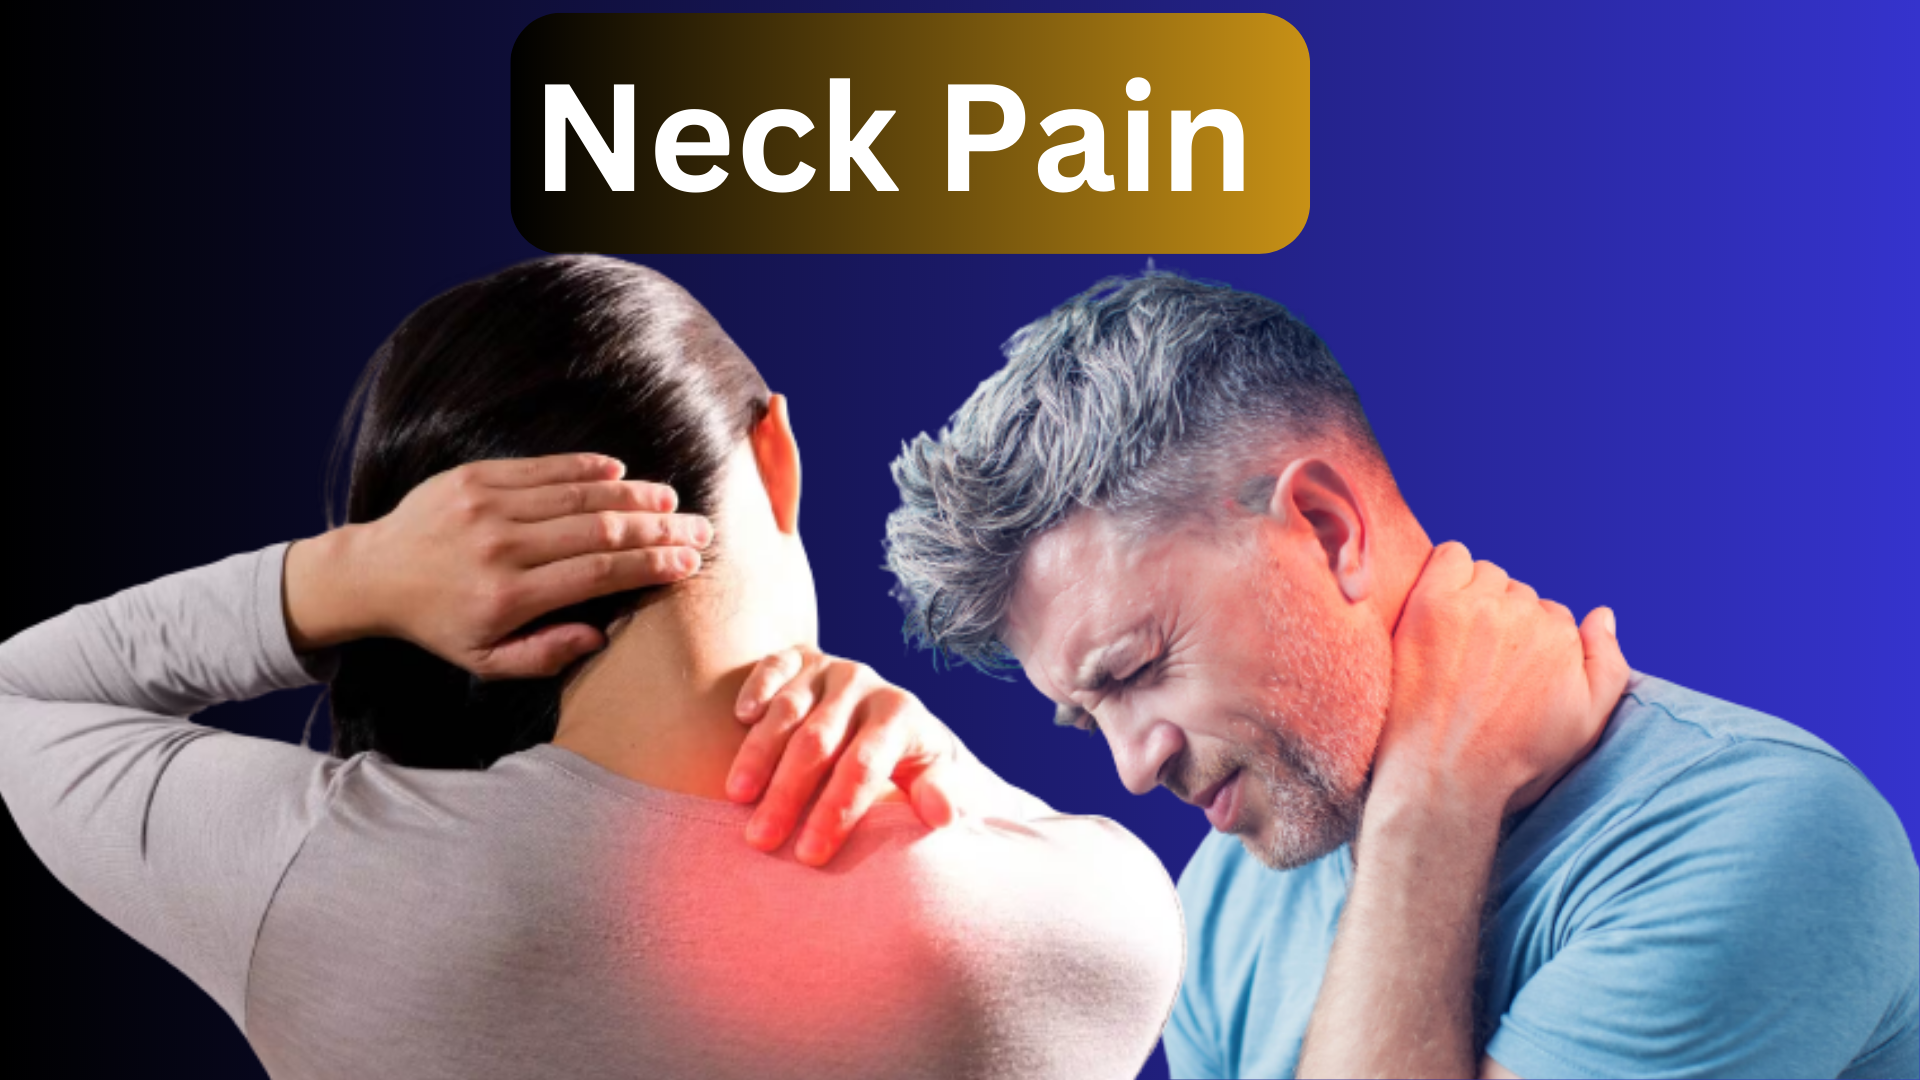 Neck Pain, Causes, Warning Sings, Severity & Treatment Options